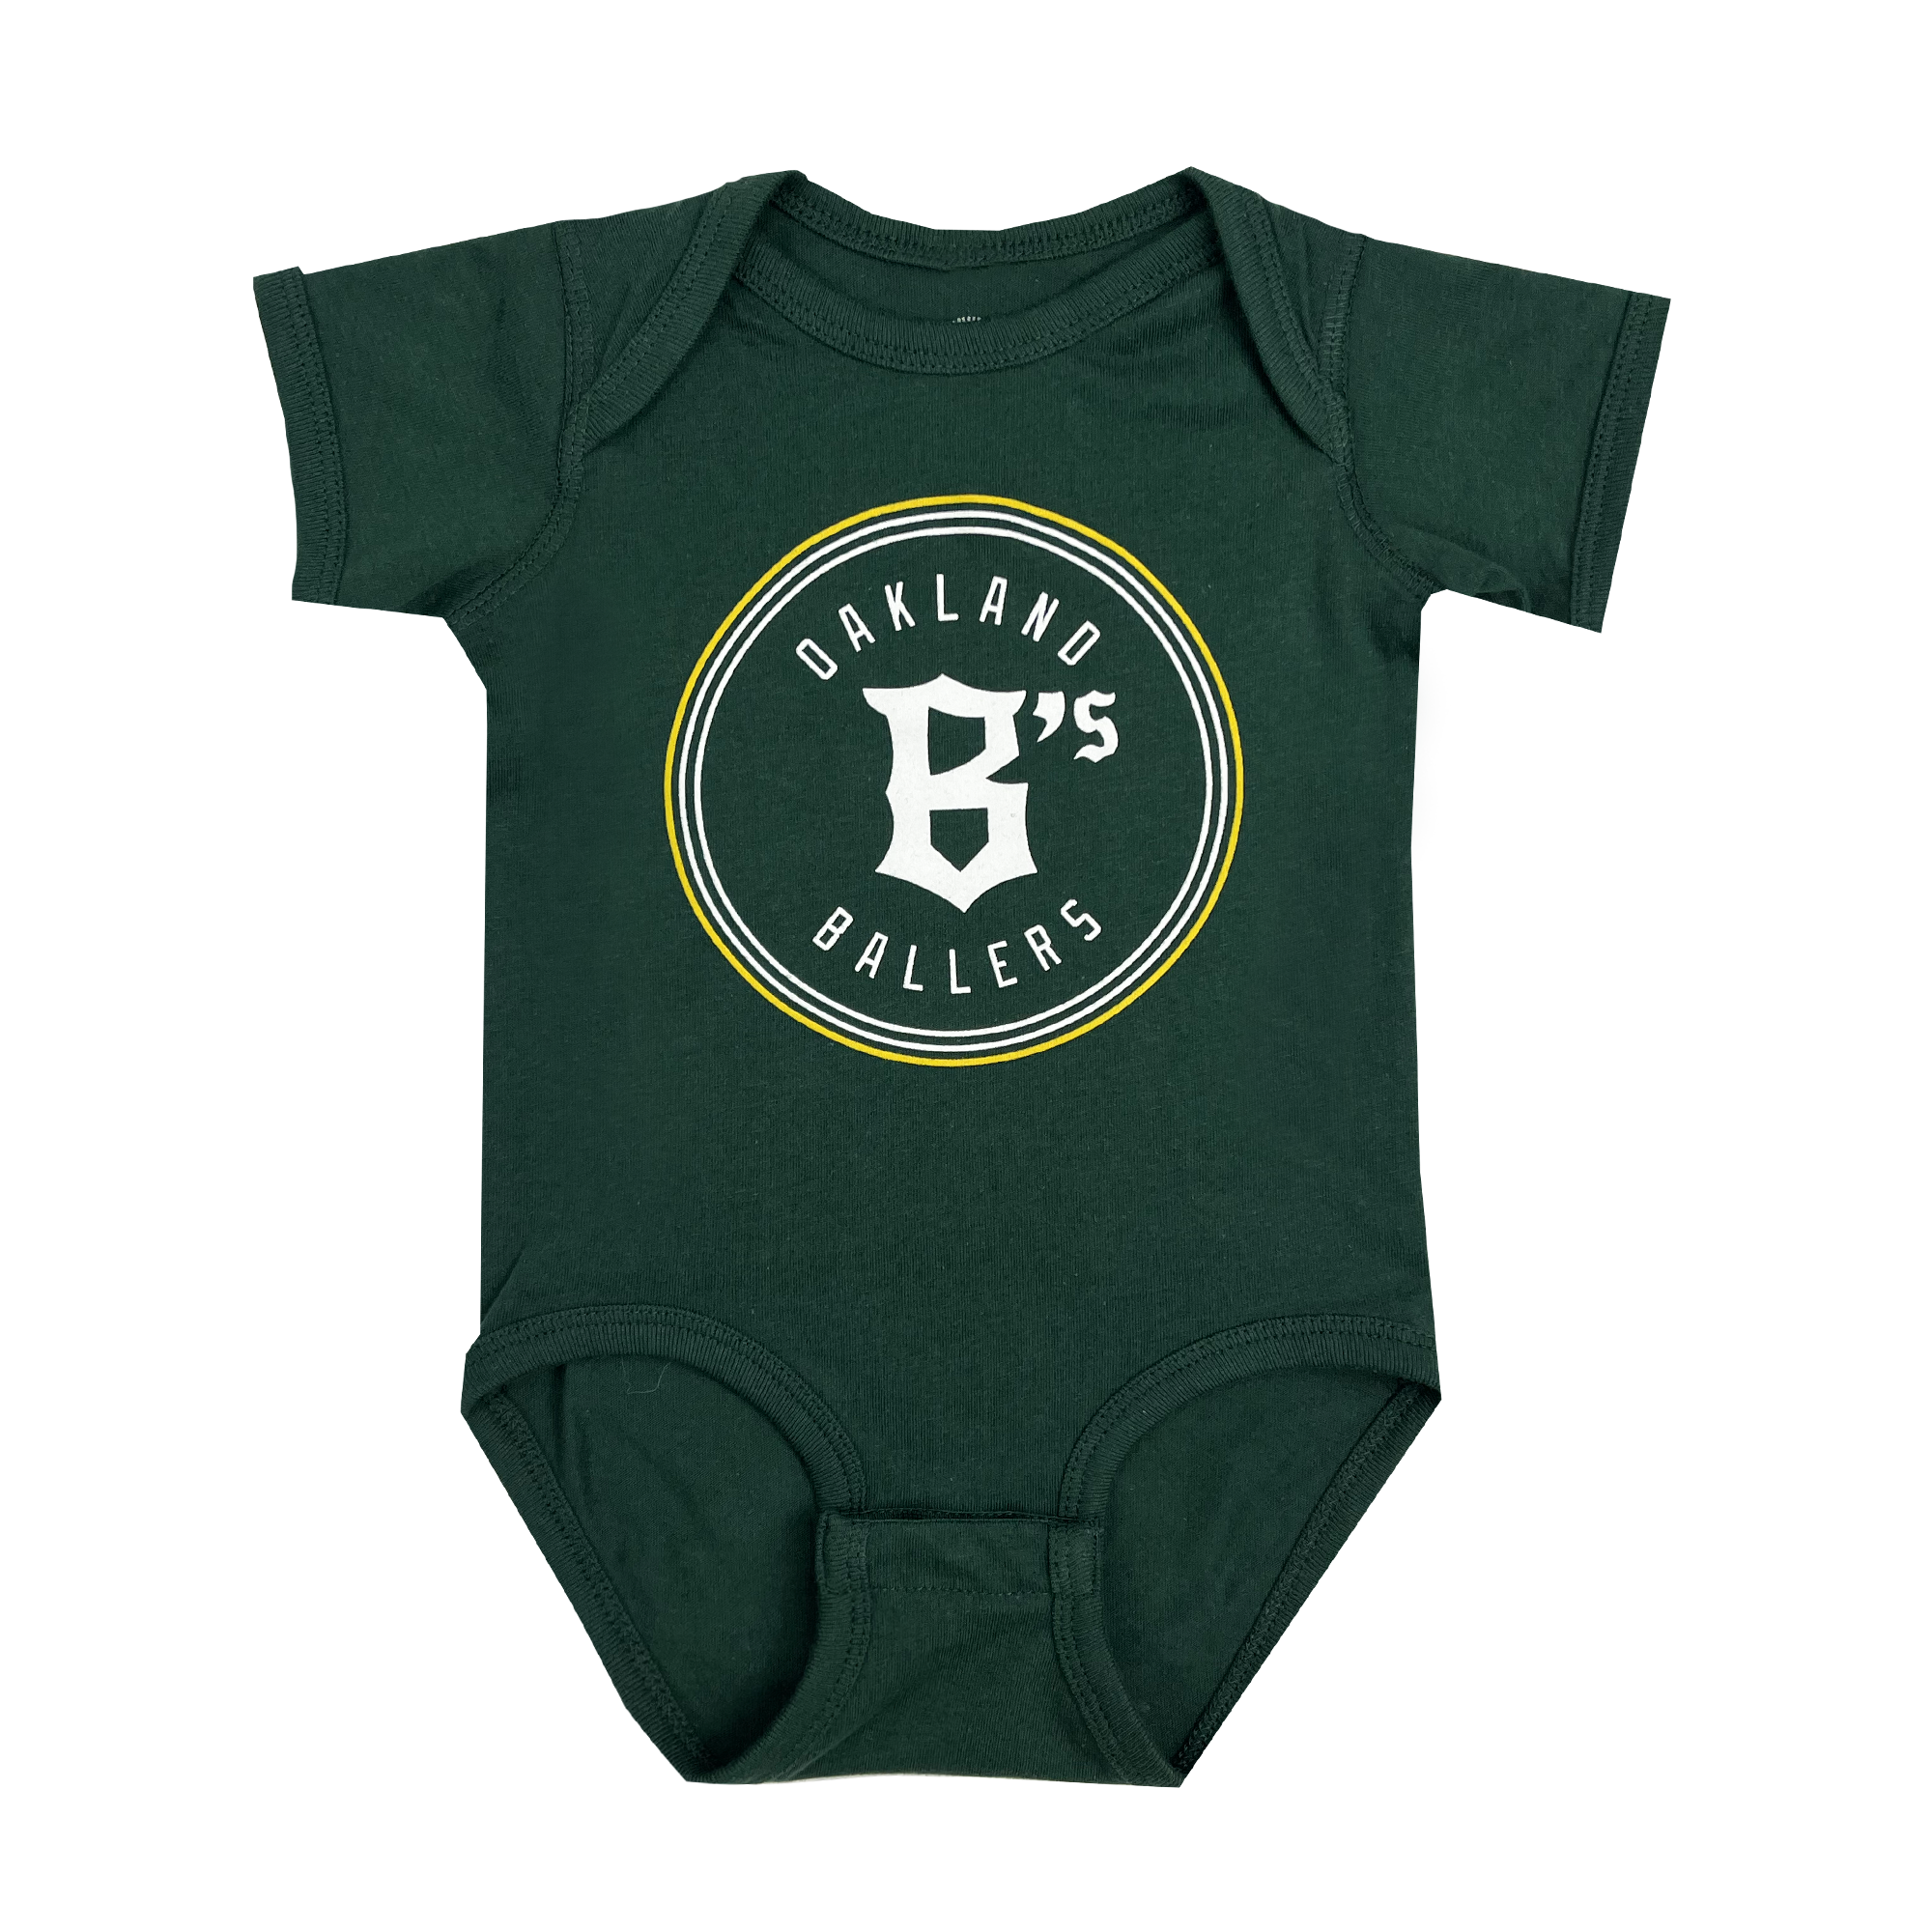 Infant Oakland Ballers Logo One-Piece